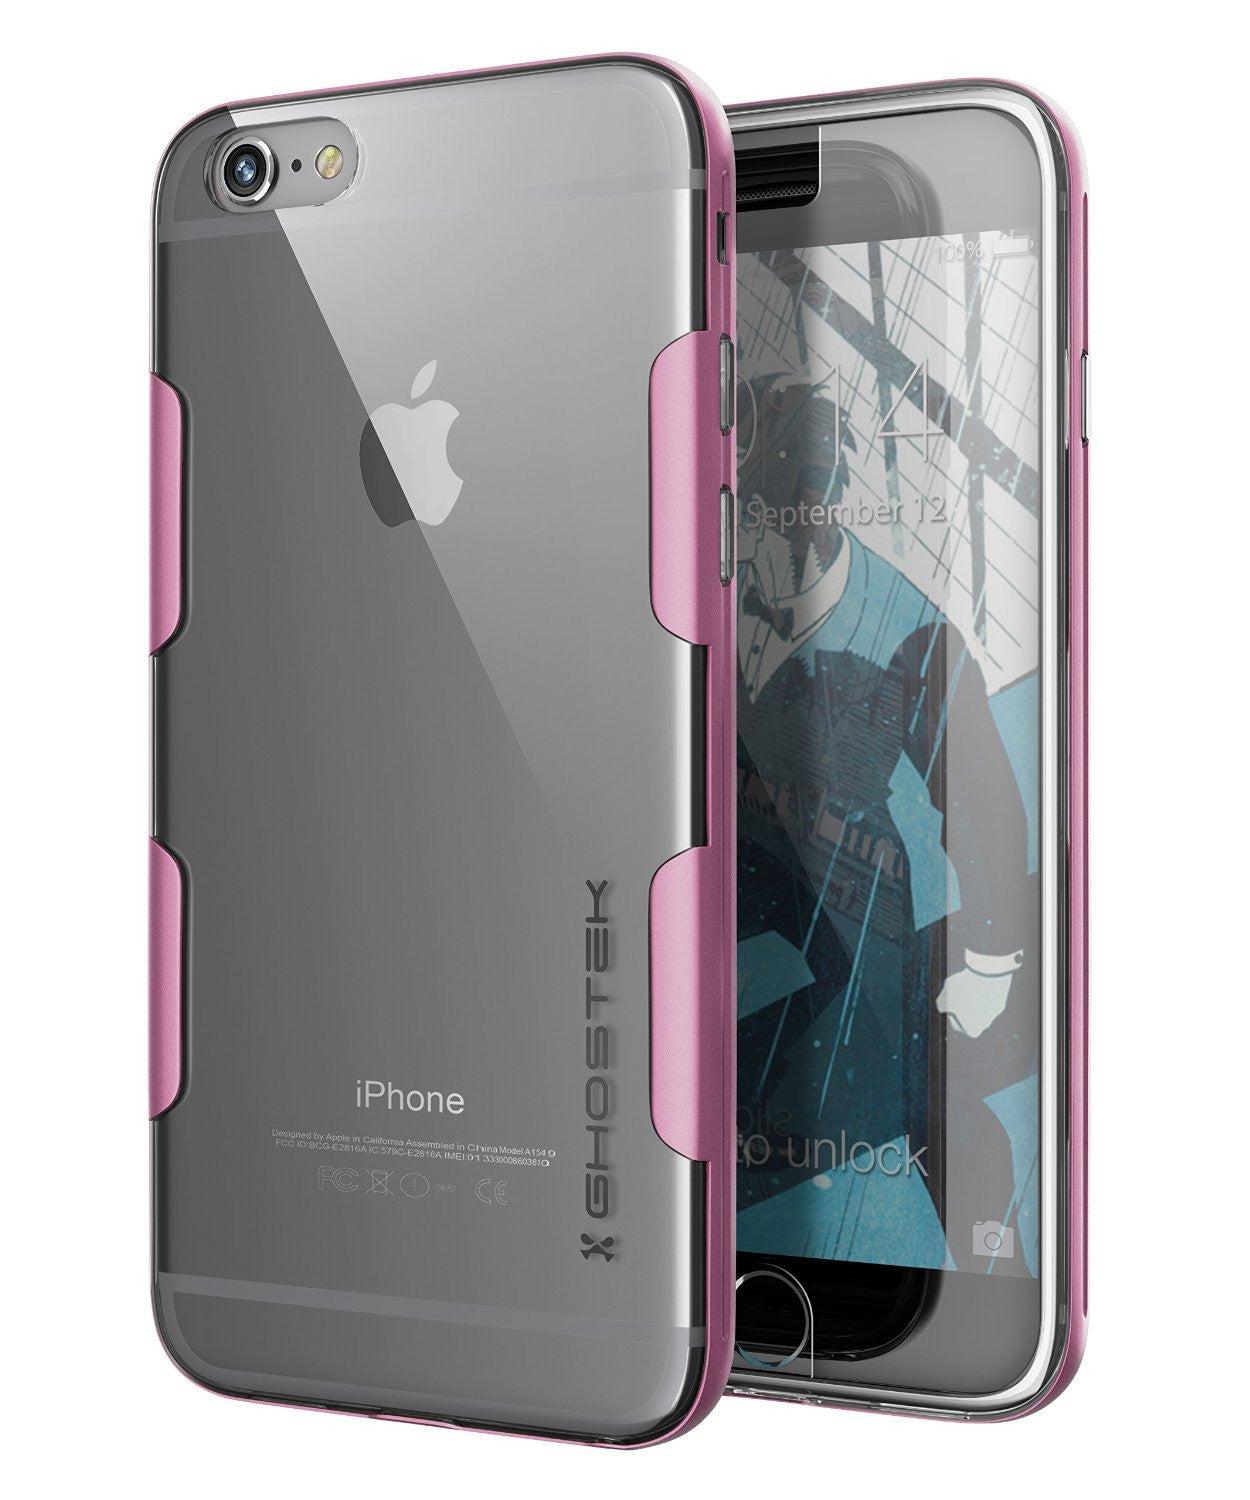 iPhone 6s Plus Case Pink Ghostek Cloak, Slim Protective Armor w/ Tempered Glass | Lifetime Warranty (Color in image: pink)